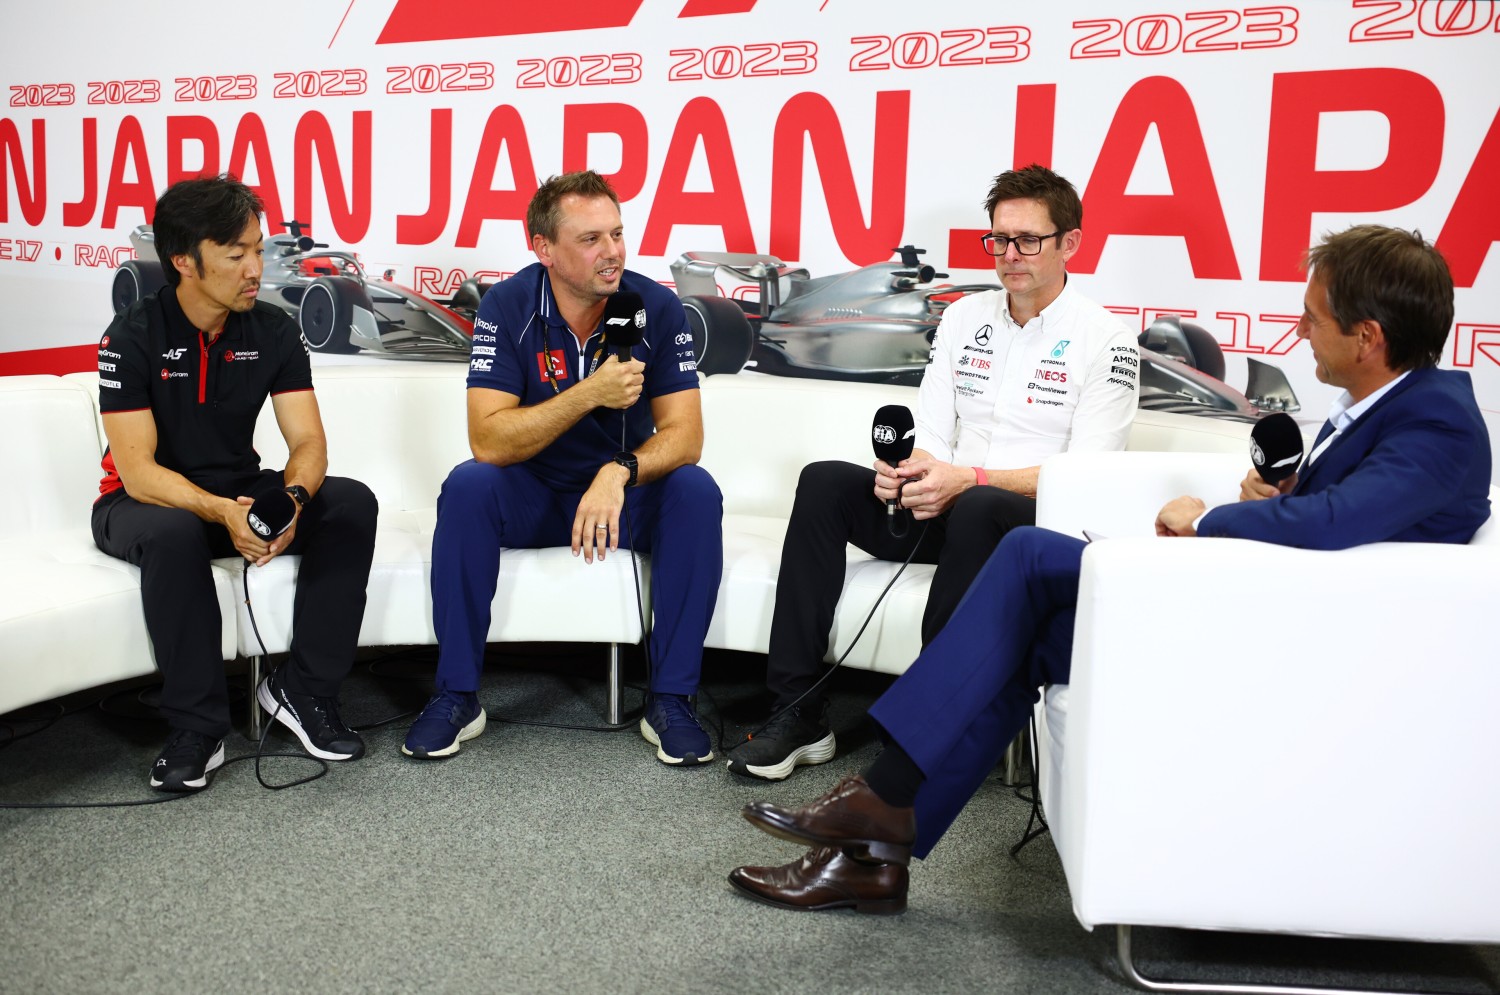 Ayao Komatsu, Trackside Engineering Director at Haas F1, Jonathan Eddolls, Head of Trackside Engineering for Scuderia AlphaTauri and Andrew Shovlin, Trackside Engineering Director of Mercedes GP attend the Drivers Press Conference during practice ahead of the F1 Grand Prix of Japan at Suzuka International Racing Course on September 22, 2023 in Suzuka, Japan. (Photo by Dan Istitene/Getty Images) // Getty Images / Red Bull Content Pool